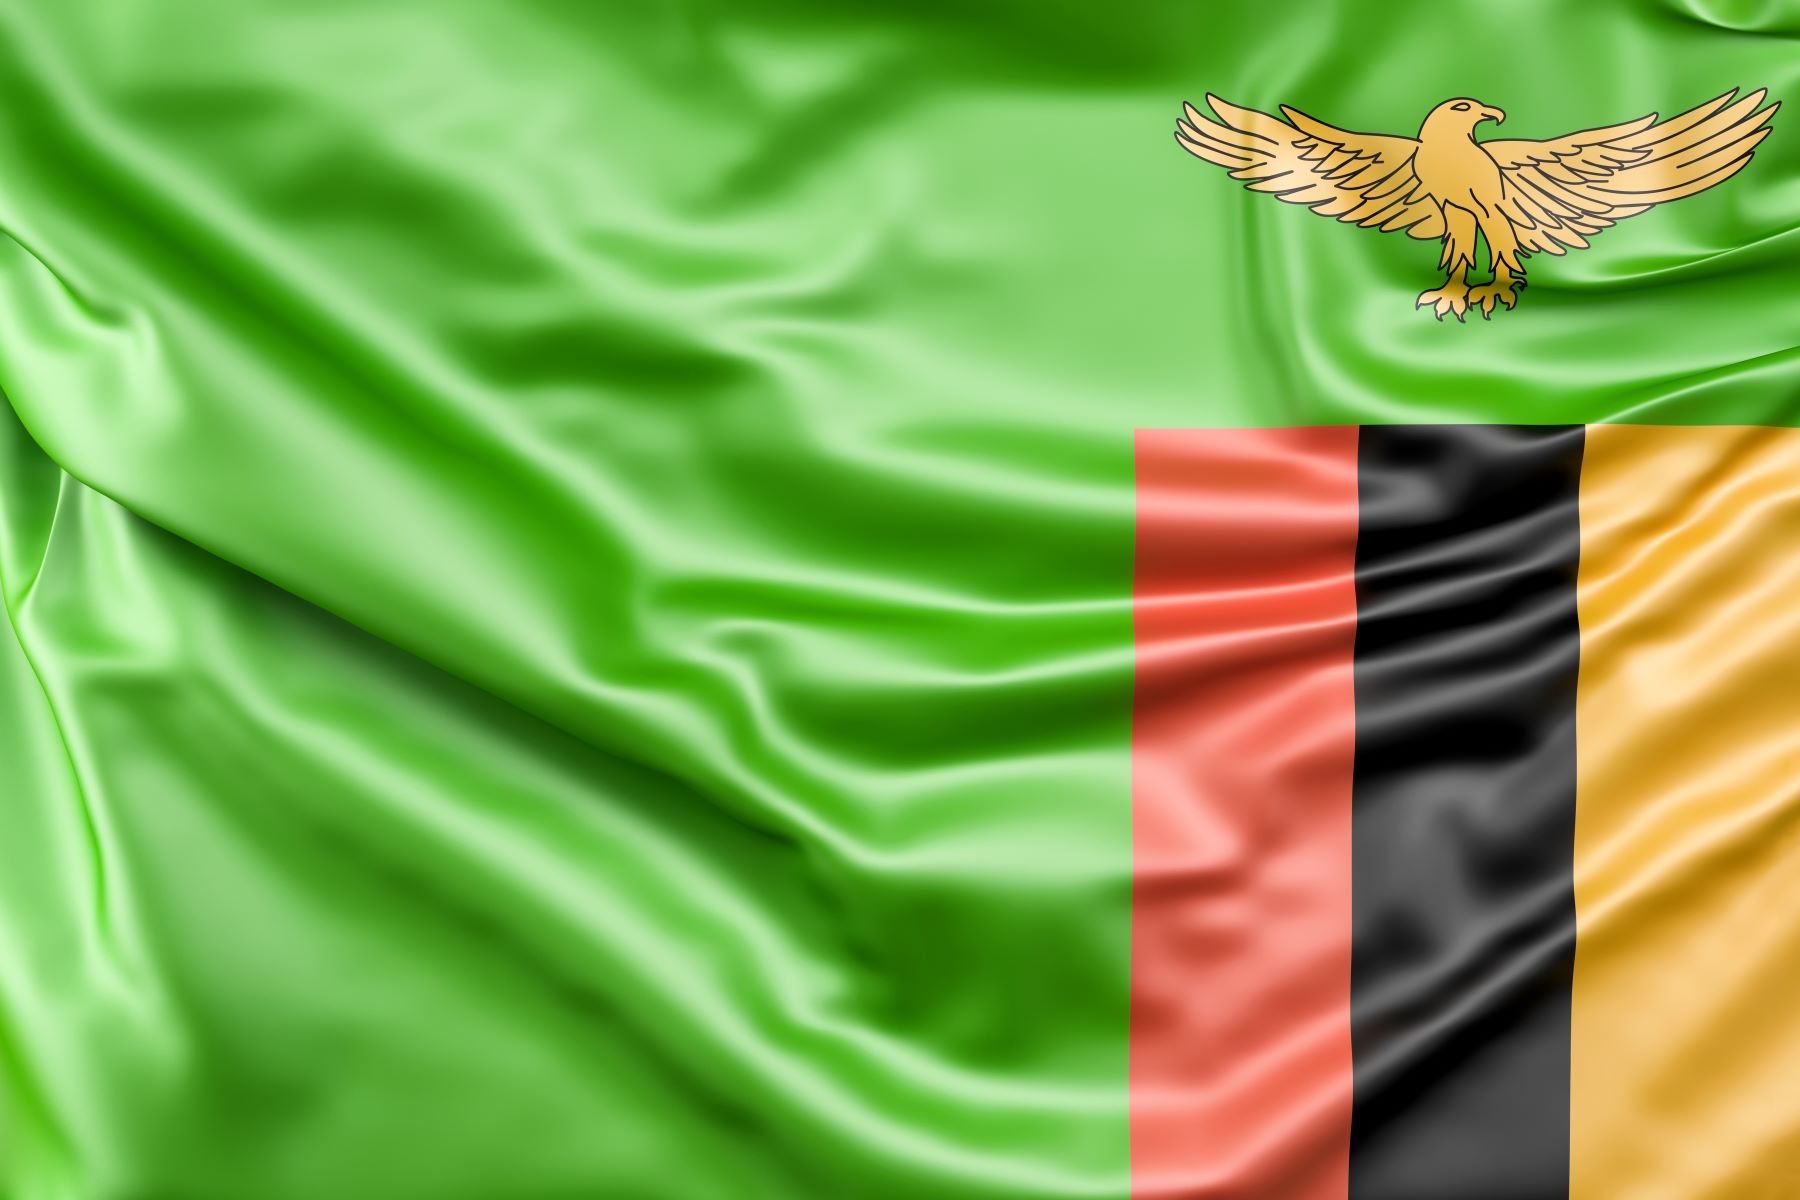 Zambia Africa Flag
Re-Cycle Partner